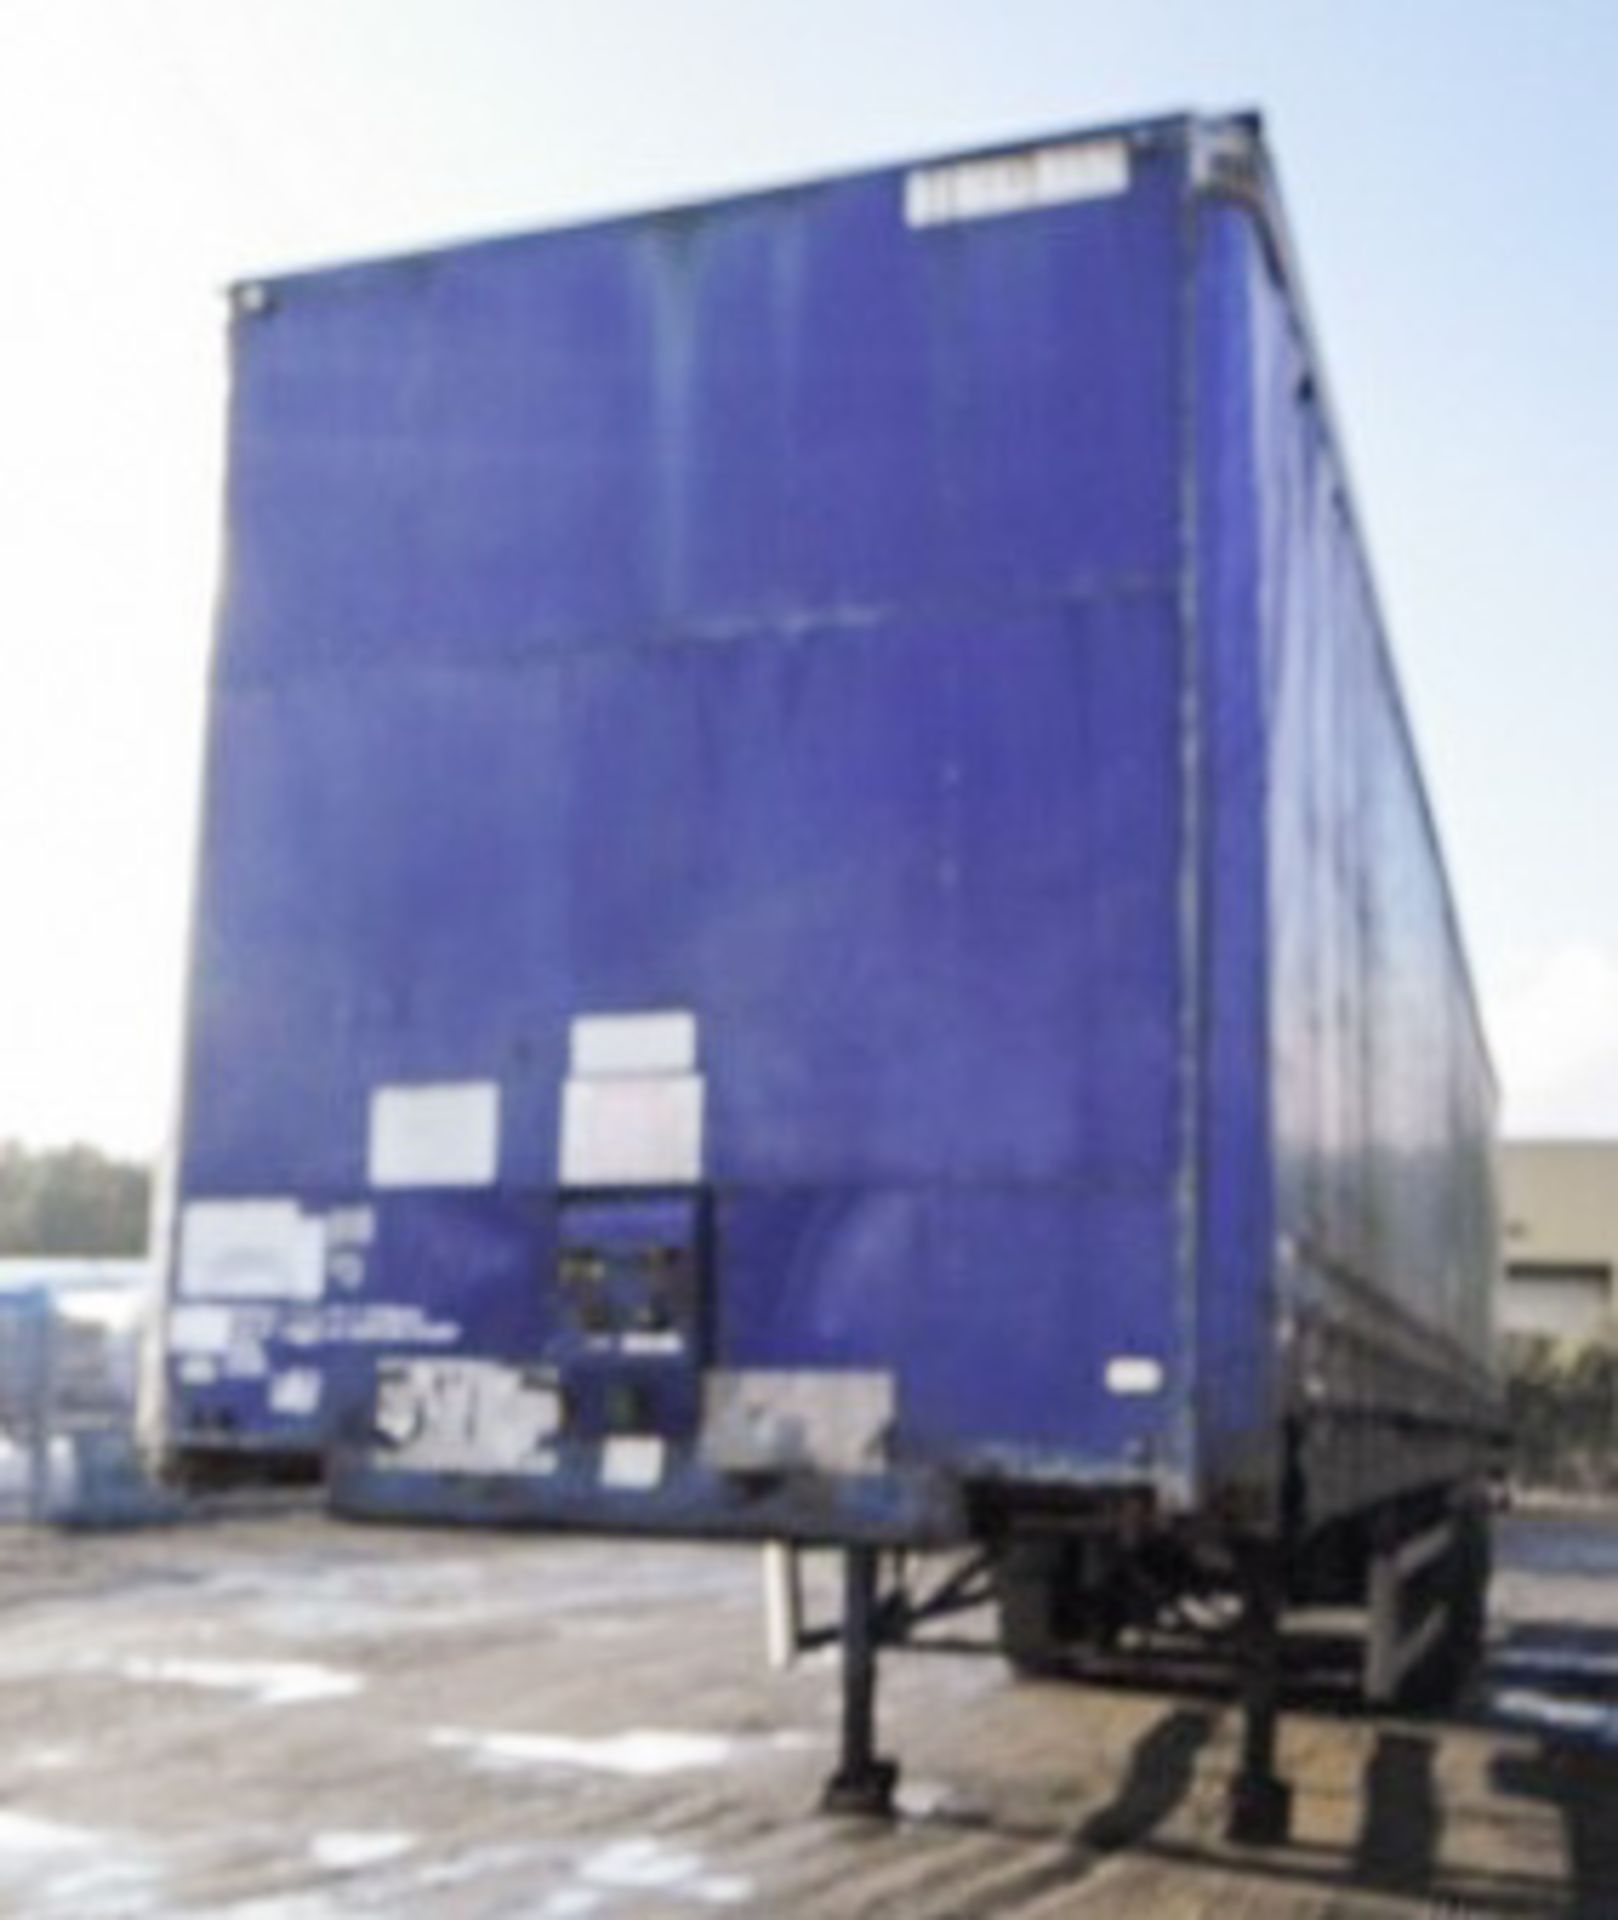 CARTWRIGHT CST 38A, S/N C026890, TRI AXLE CURTAINSIDE TRAILER - Image 8 of 8